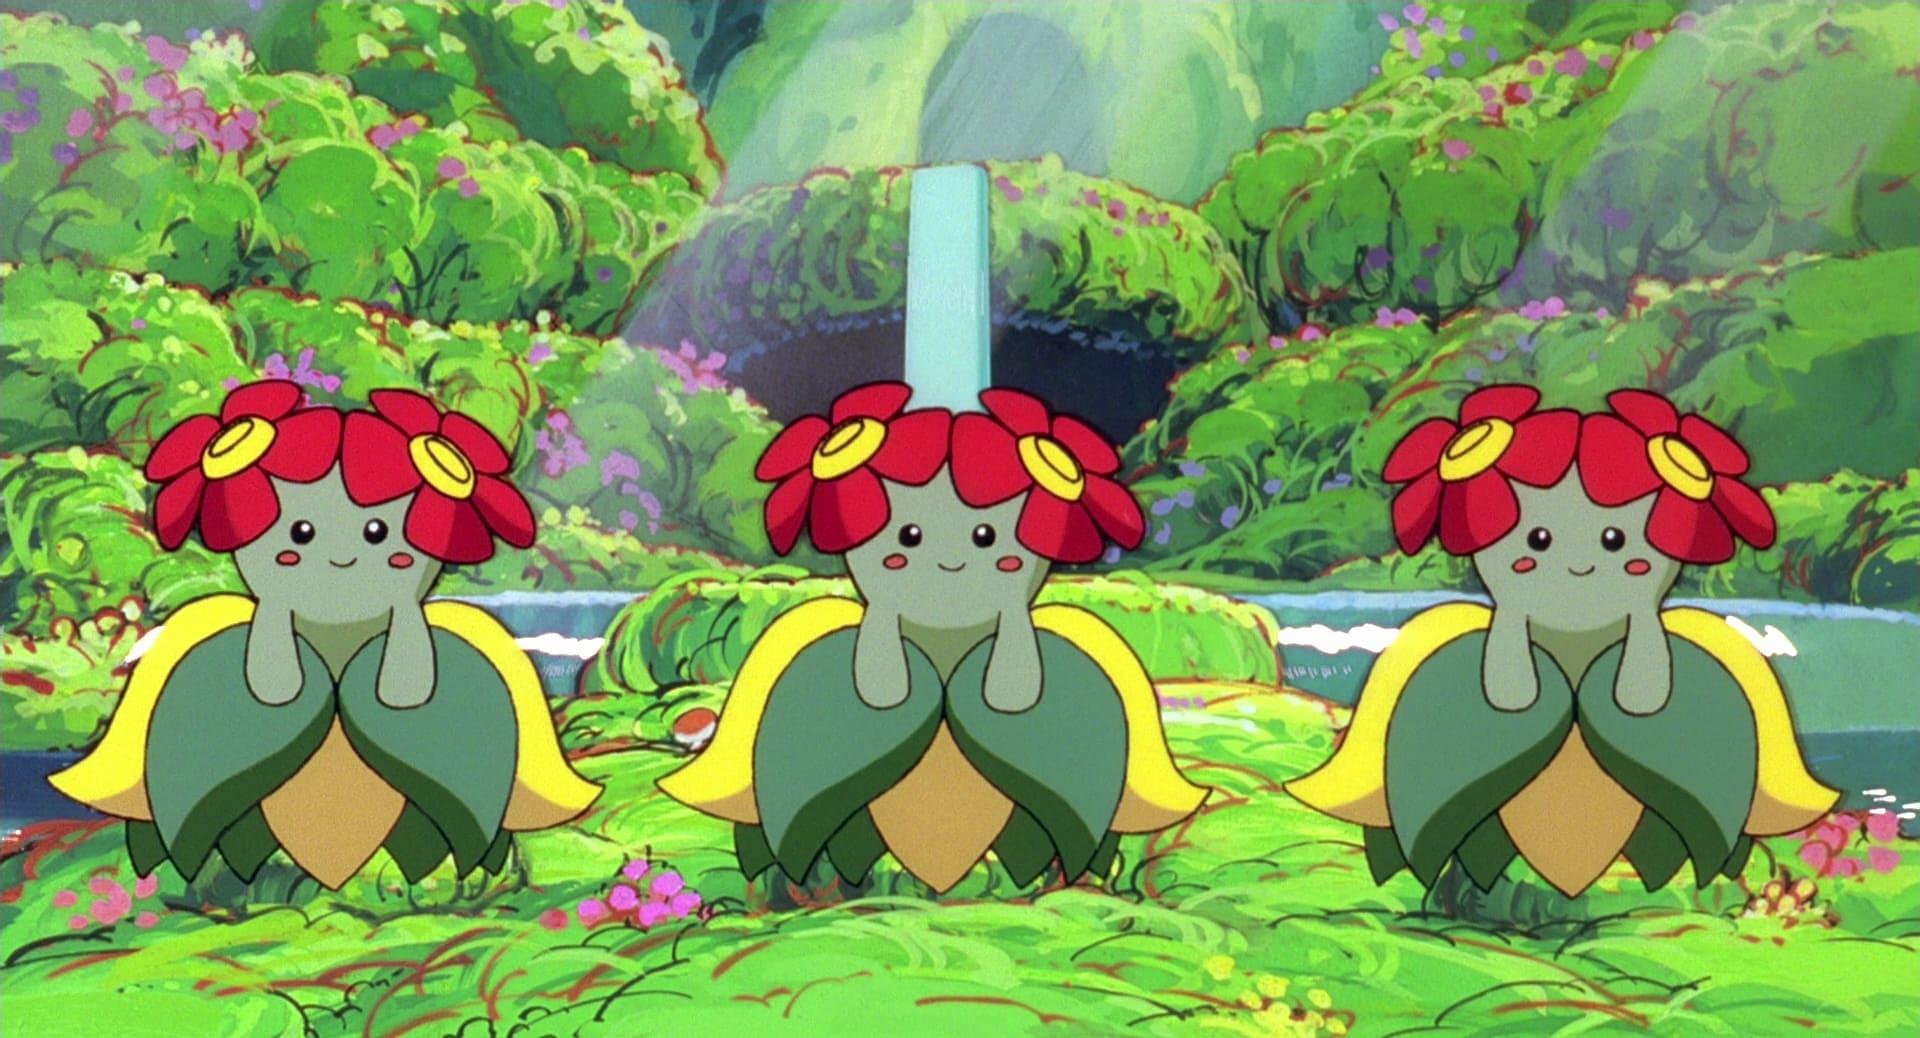 Aartwork from the anime series showing Bellossom in Pokemon, one of the 'mon you need to use a Sun Stone on to evolve.